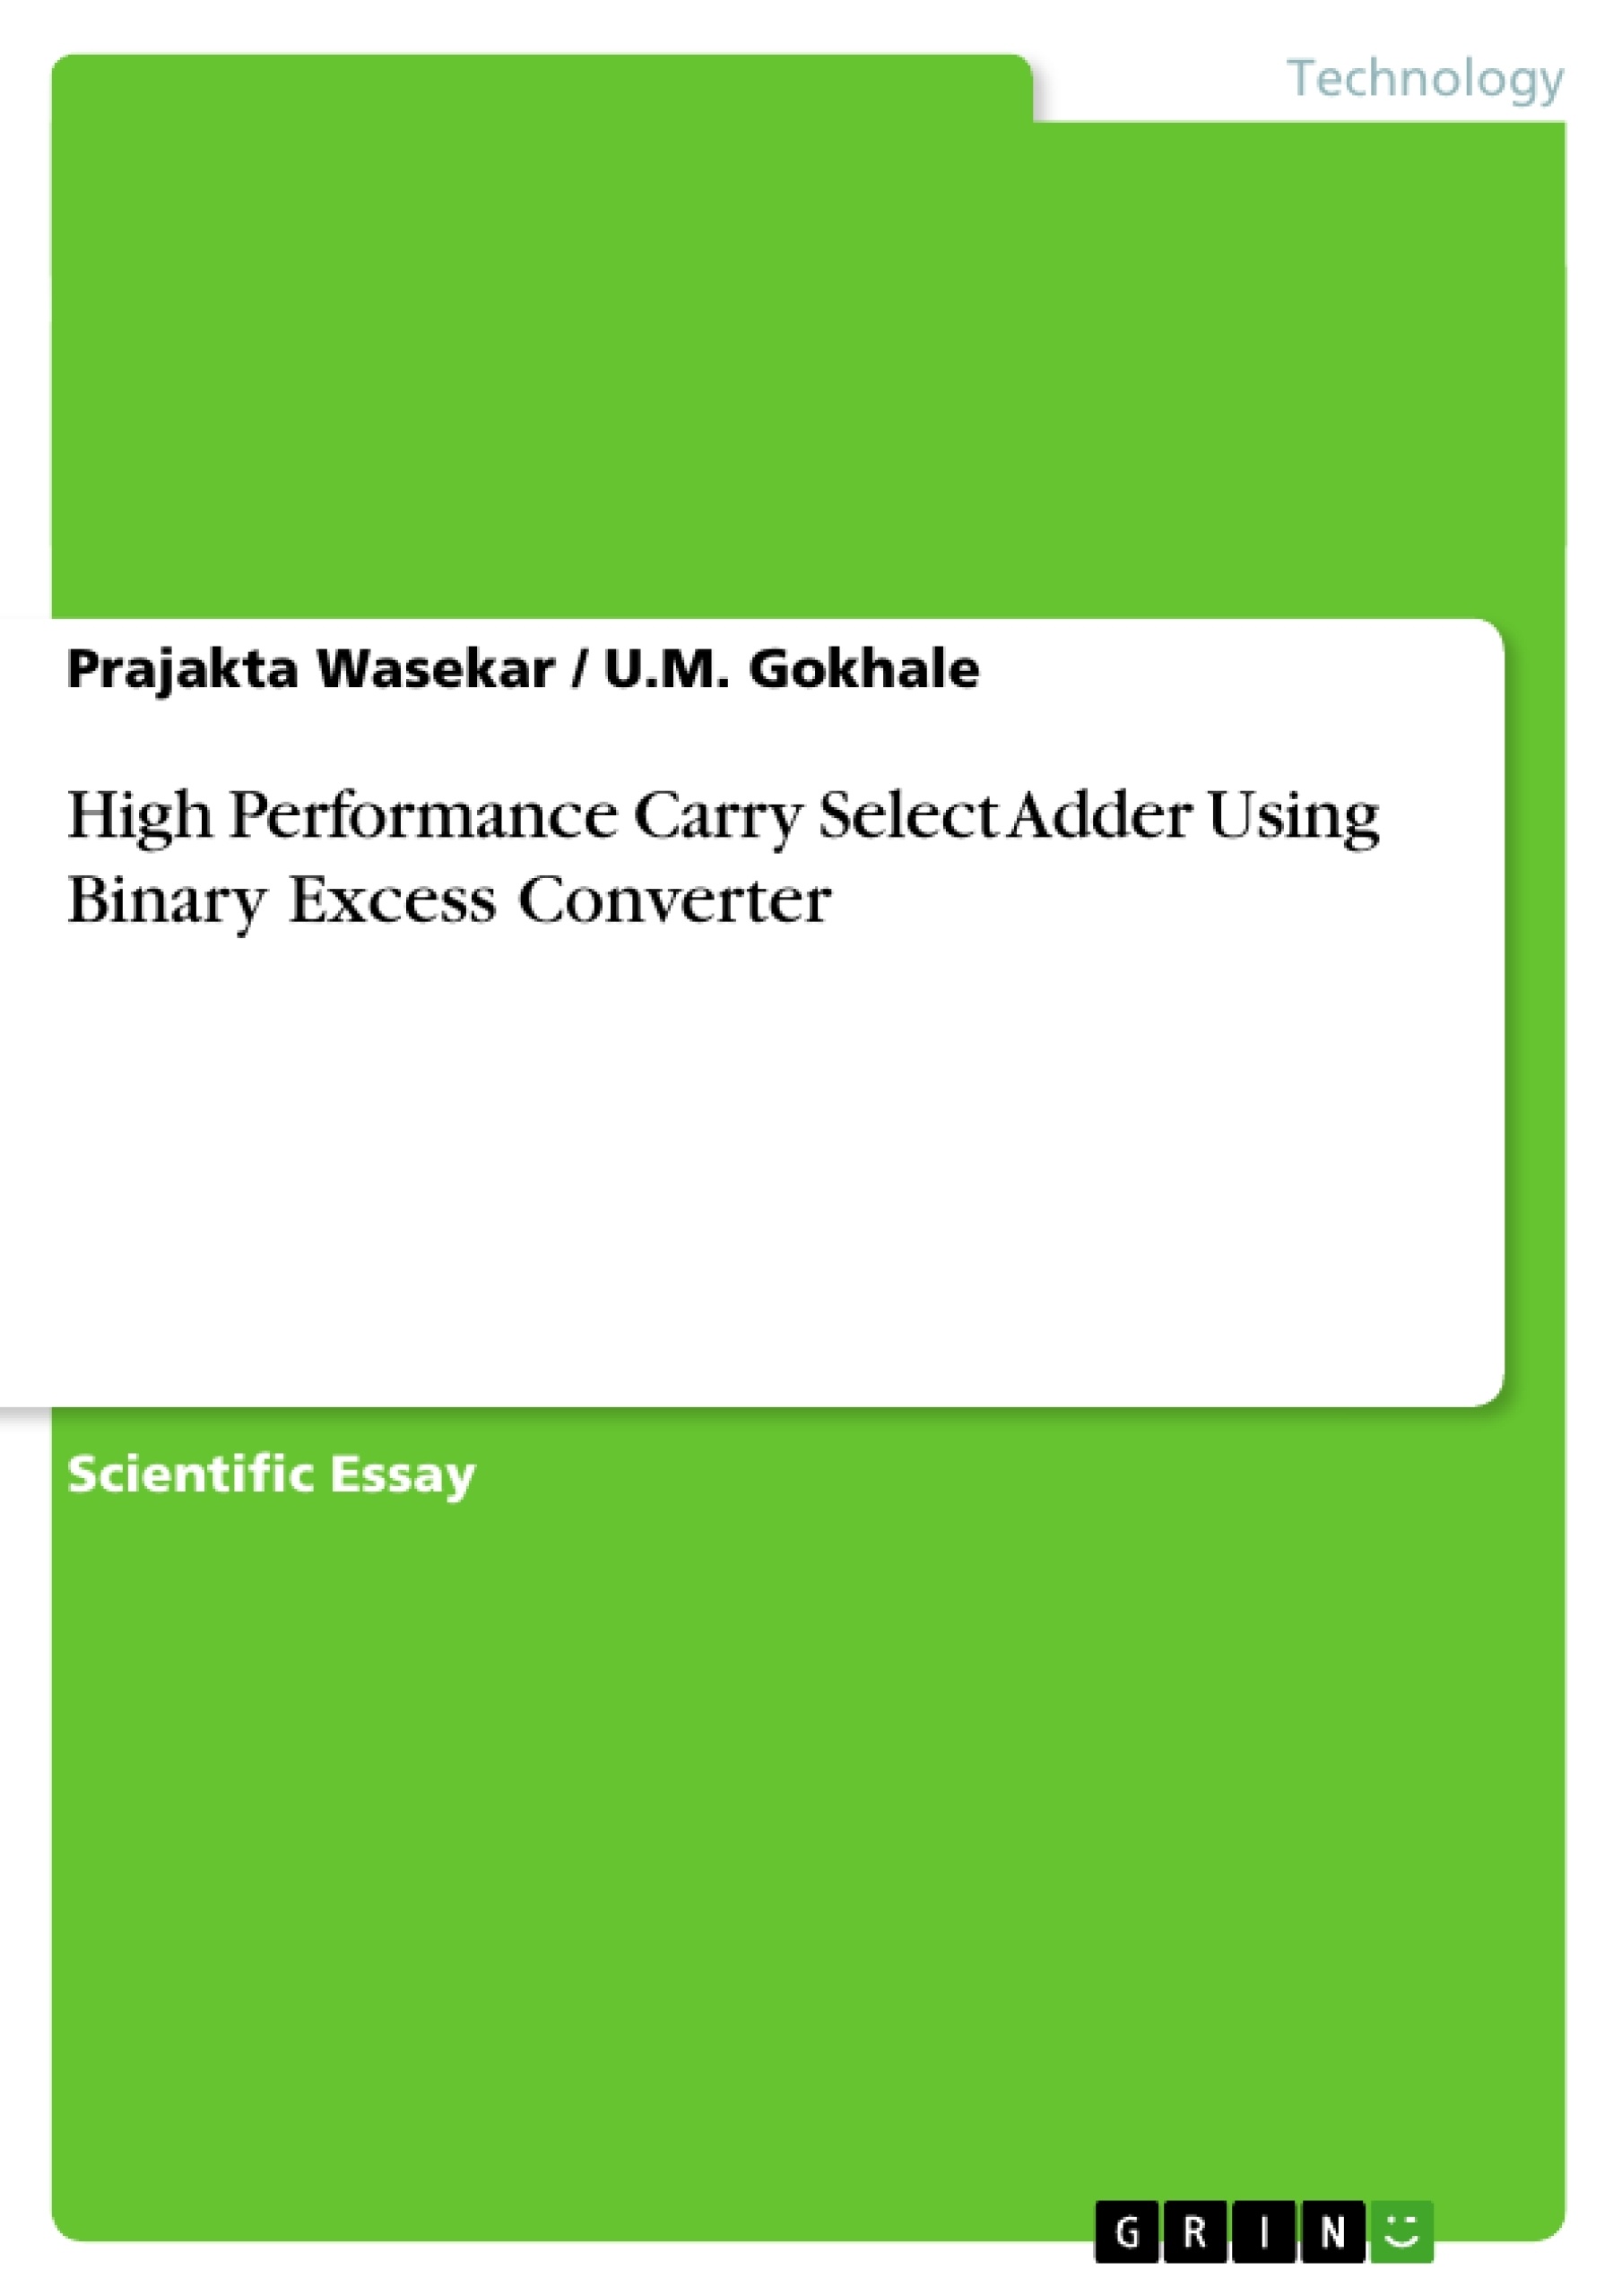 Título: High Performance Carry Select Adder Using Binary Excess Converter